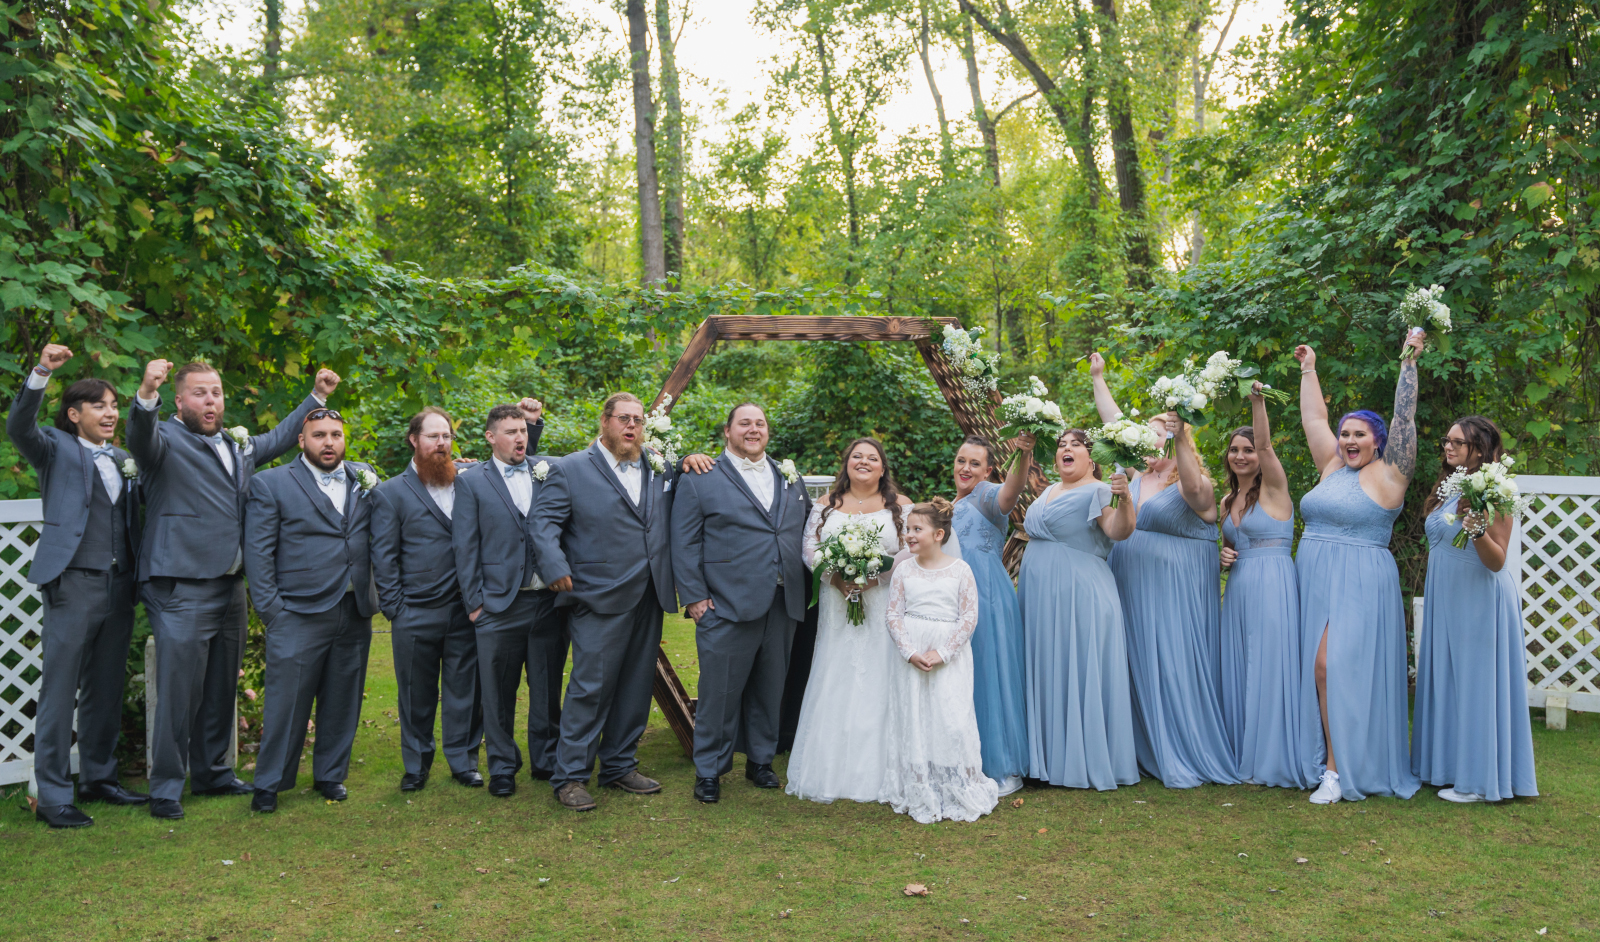 Bride and groom with bridal party, bridal party portrait, fun bridal party portrait, cheering, large bridal party, flower girl, hexagon arch, green, trees, nature, outdoor September wedding ceremony at Westfall Event Center